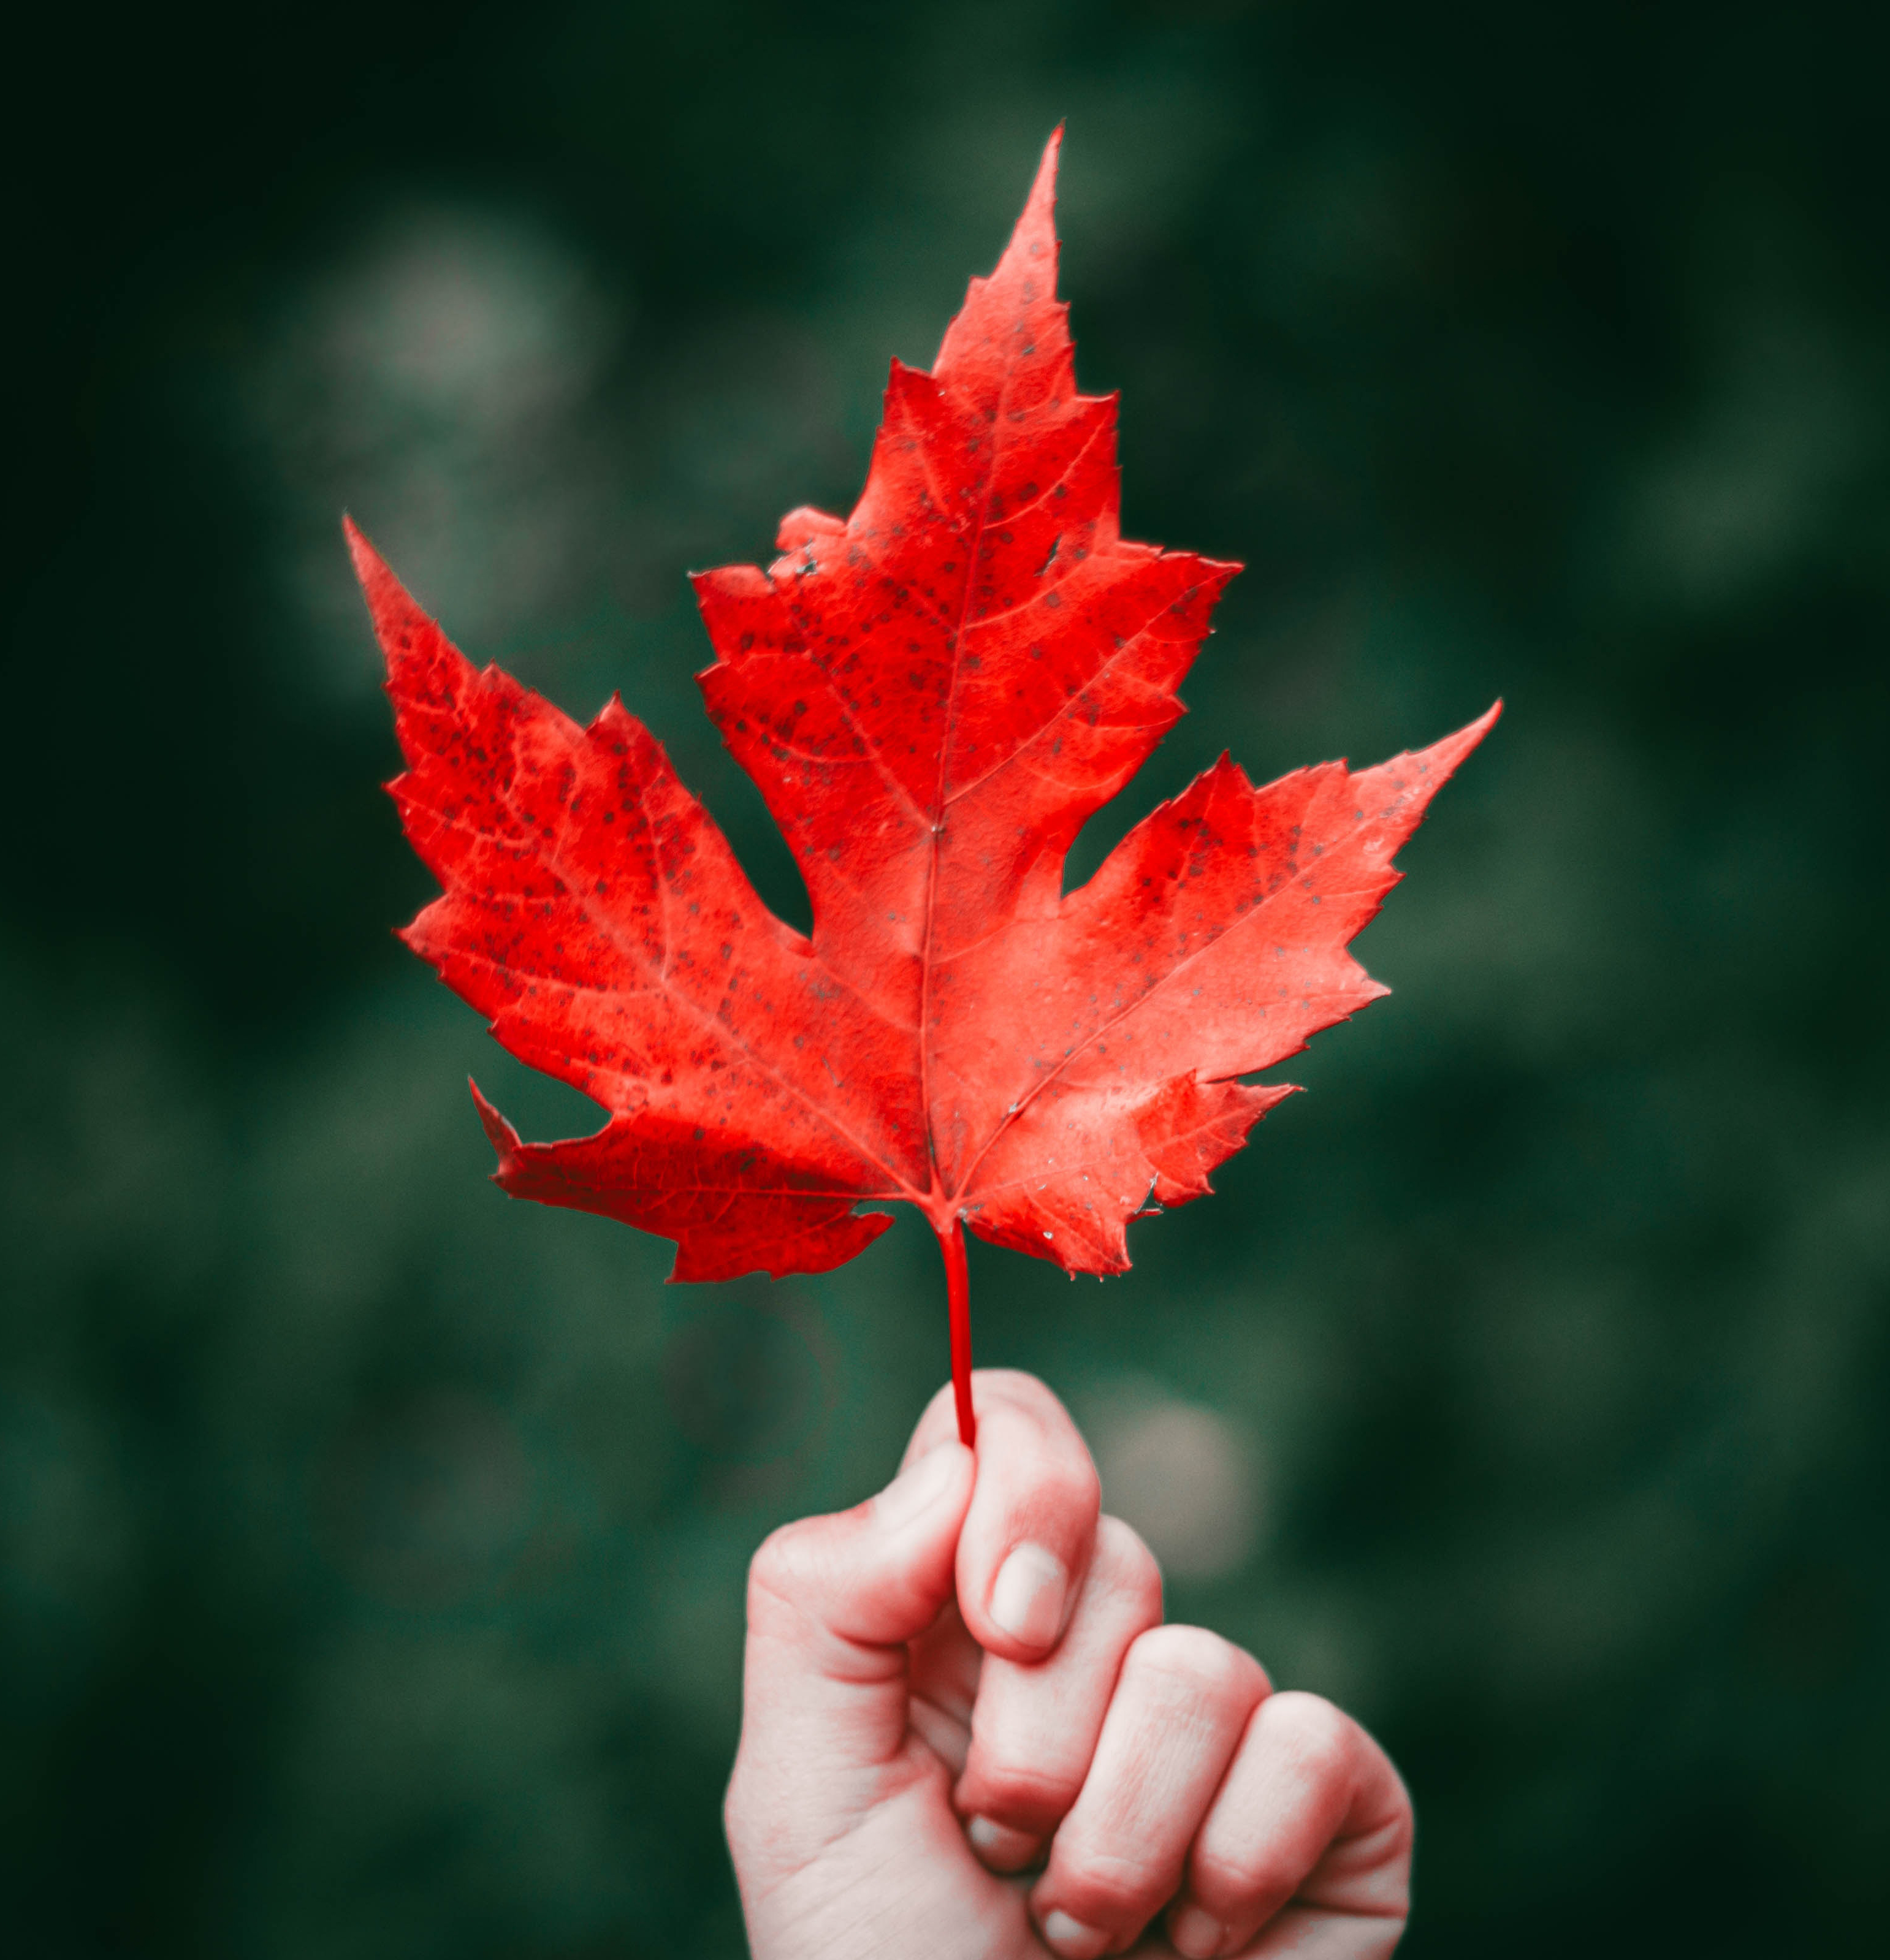 A photo of a red maple leaf